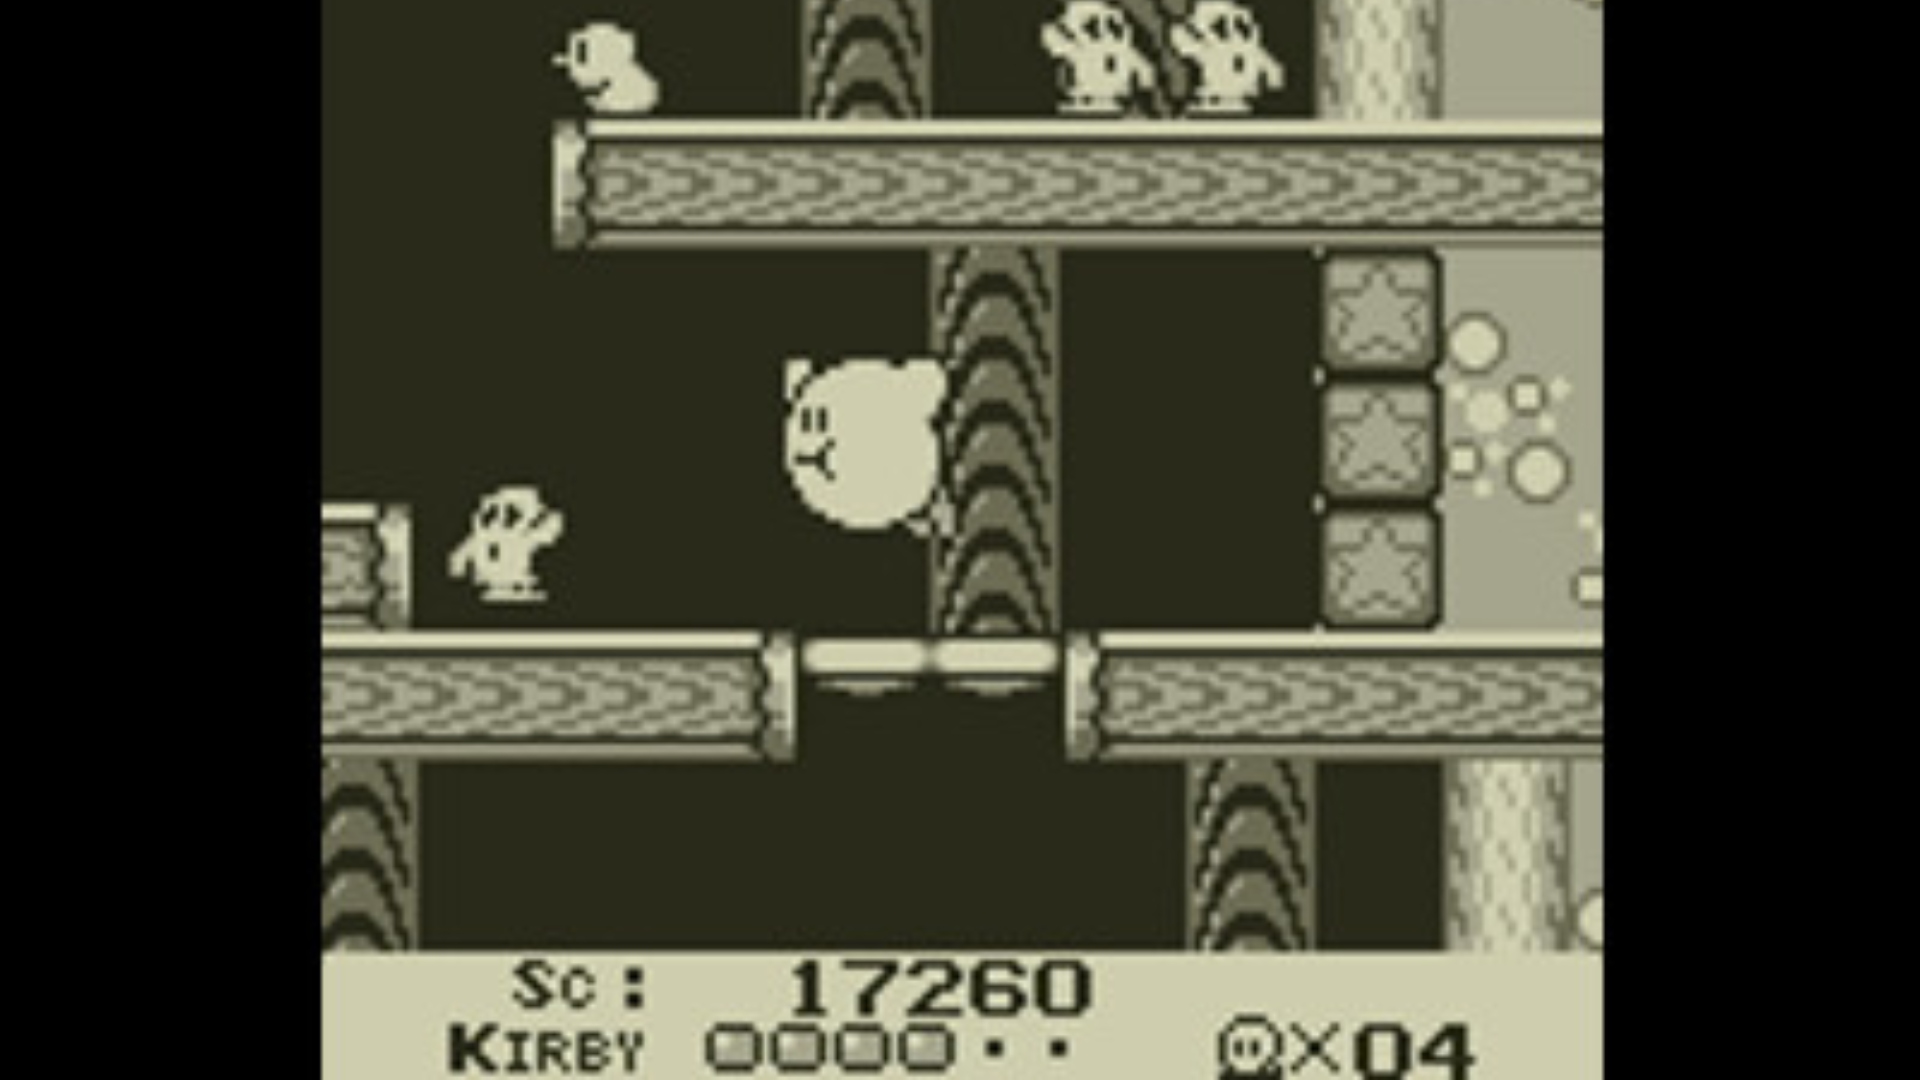 Best Kirby games: Kirby's Dream Land. Image shows Kirby flying inside a hollow tree.